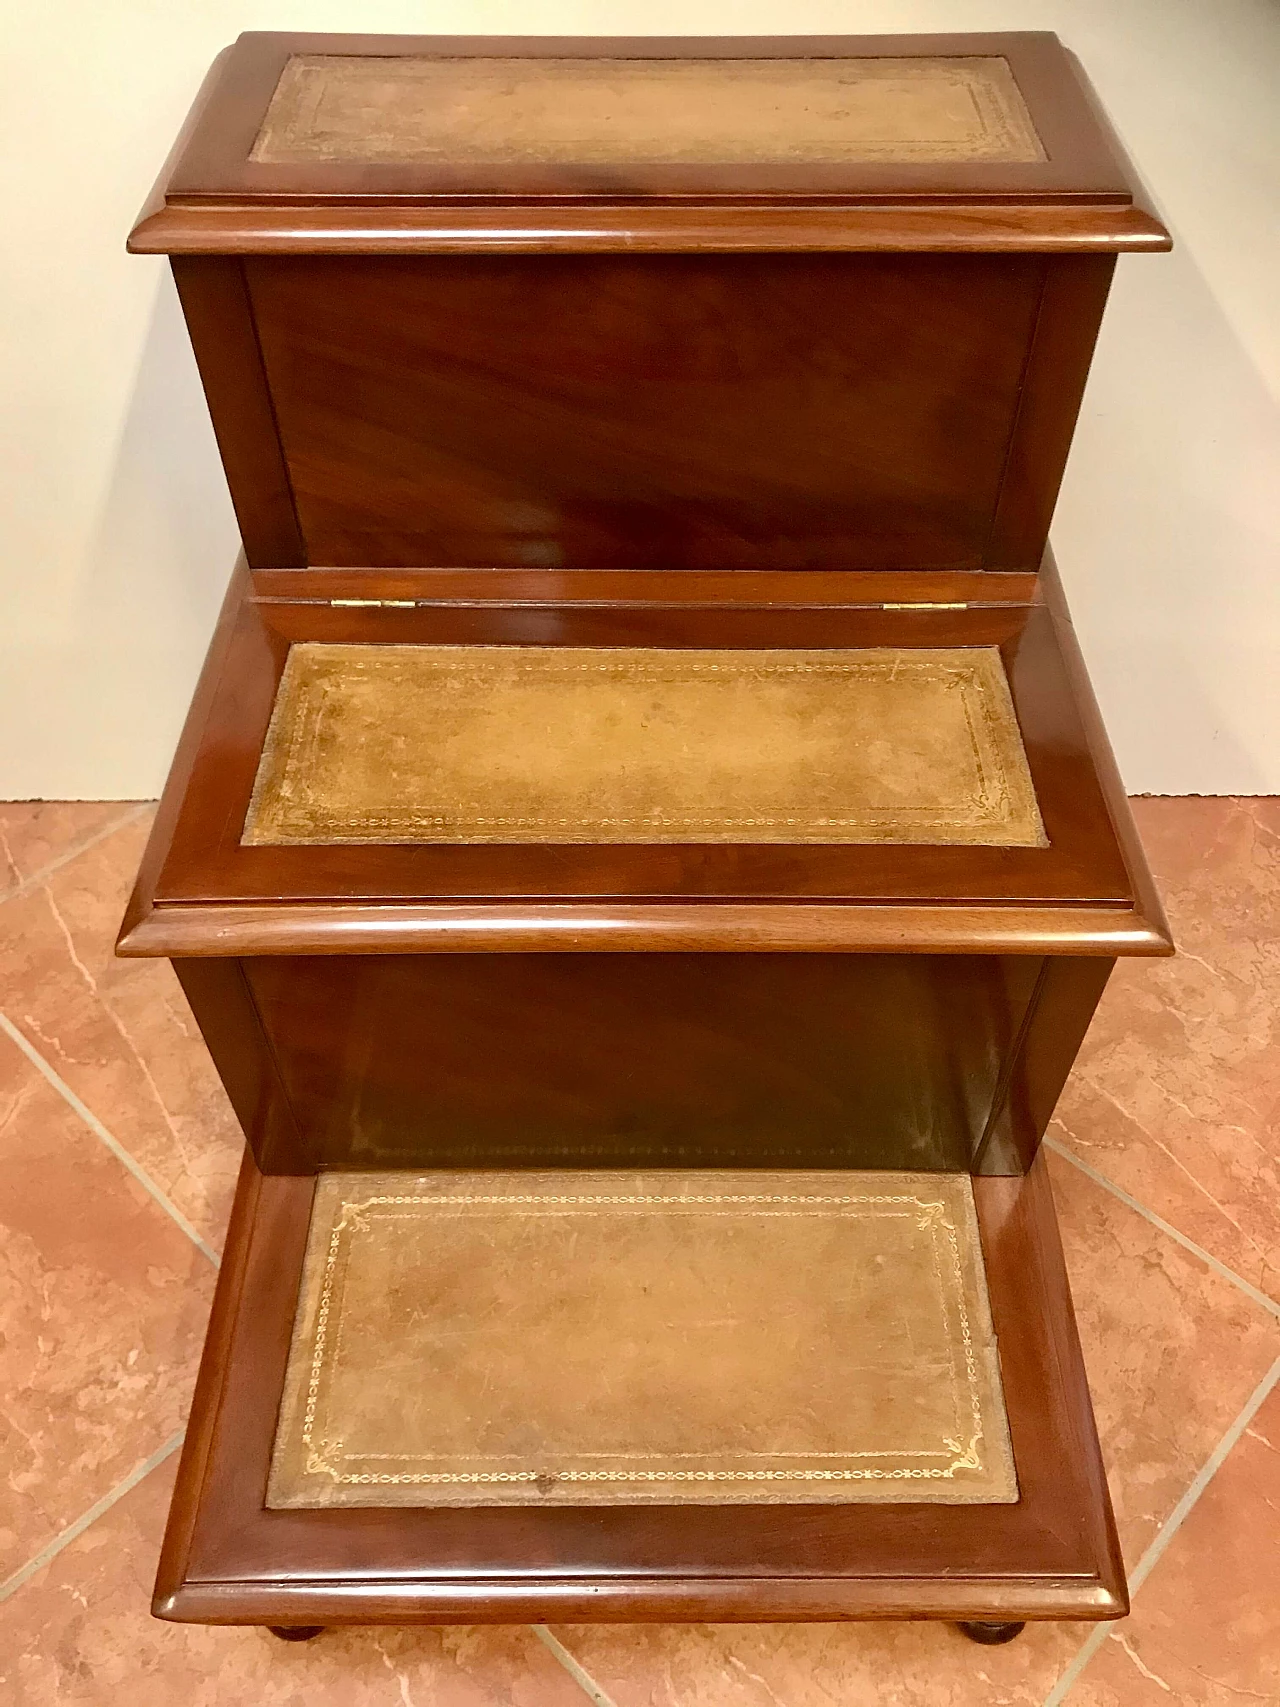 3 steps library ladder in mahogany and leather with 2 compartments, 19th century 1251618